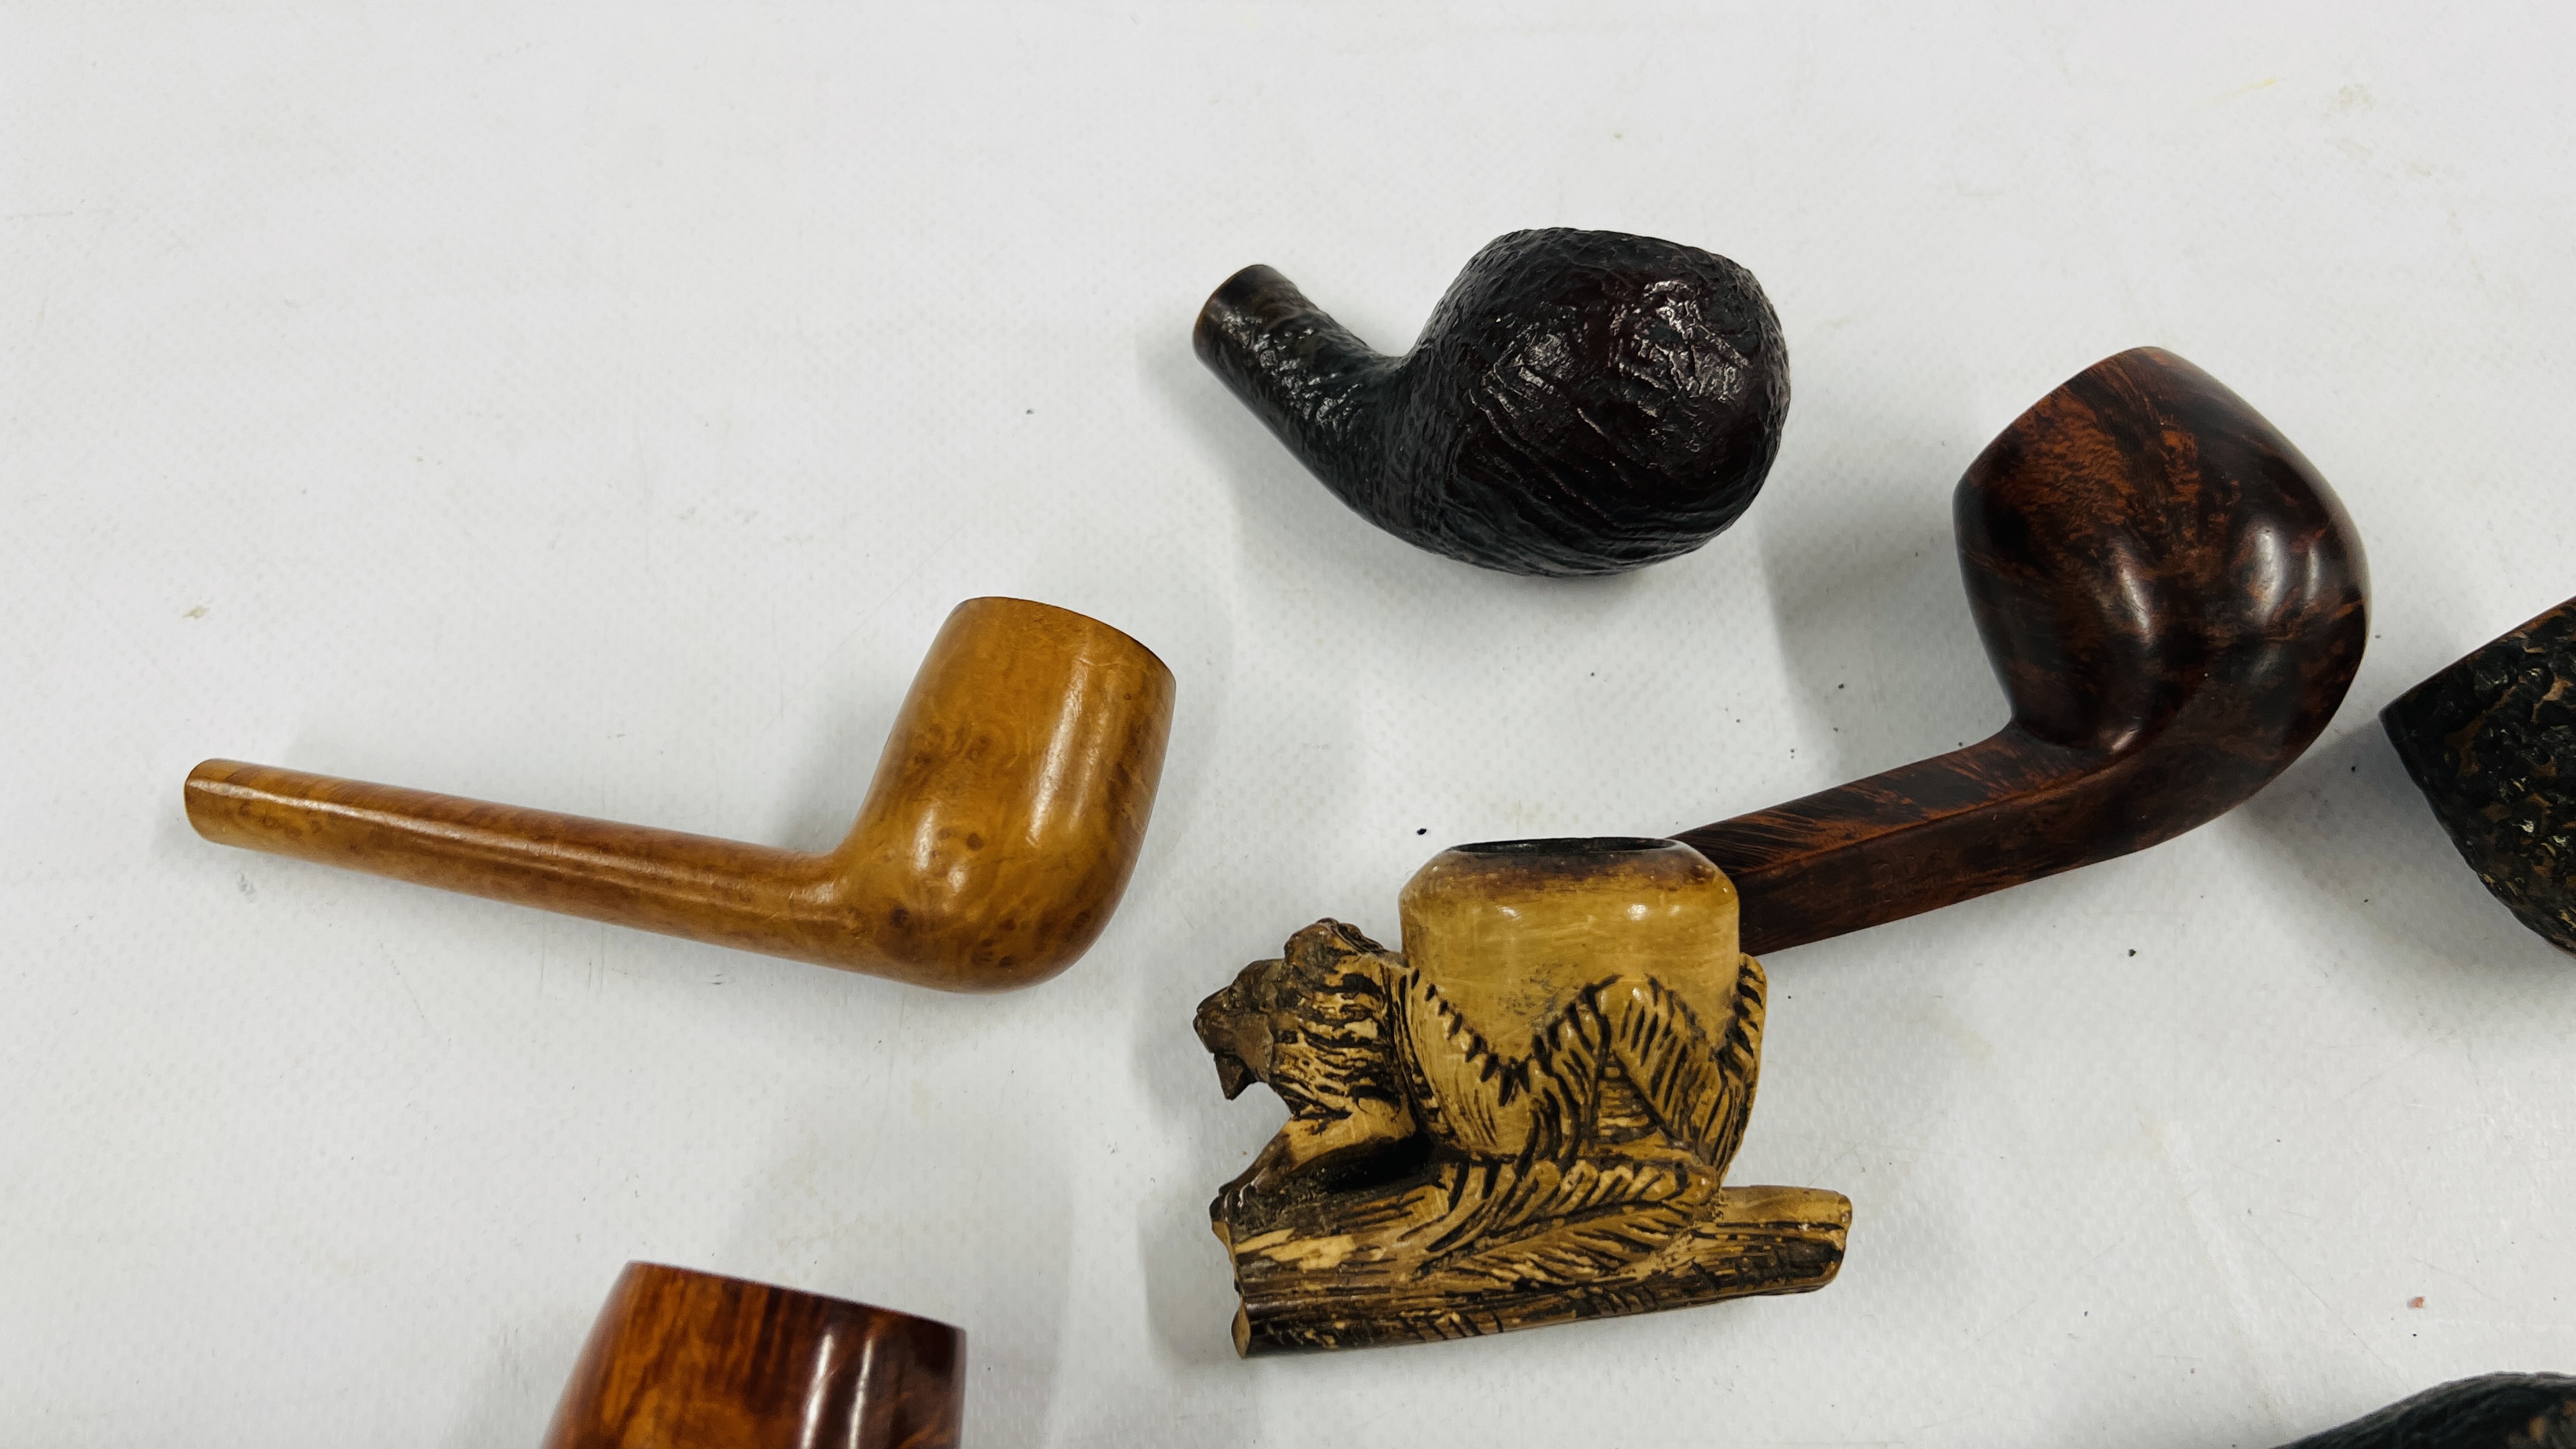 A GROUP OF 8 VINTAGE TOBACCO SMOKING PIPES (NO STEMS) TO INCLUDE BRIAR WOOD EXAMPLES & EXAMPLES - Image 8 of 9